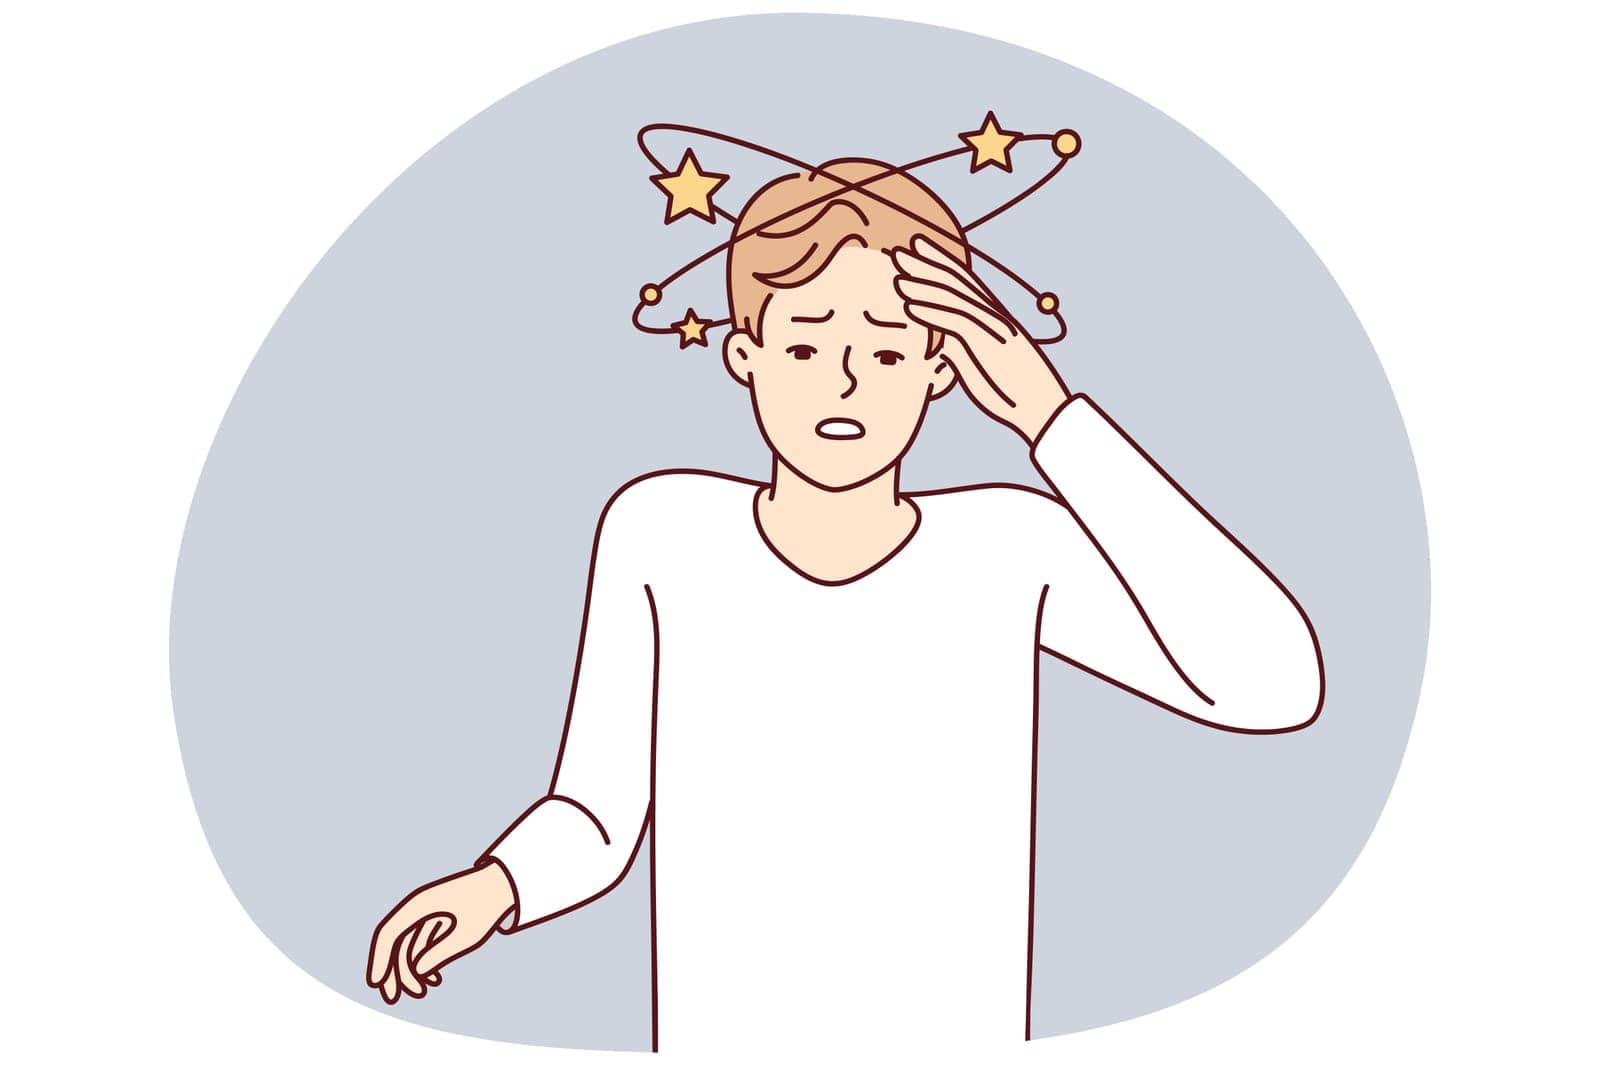 Suffering man experiencing pain in head after severe injury puts hand on forehead. Vector image by Vasilyeva